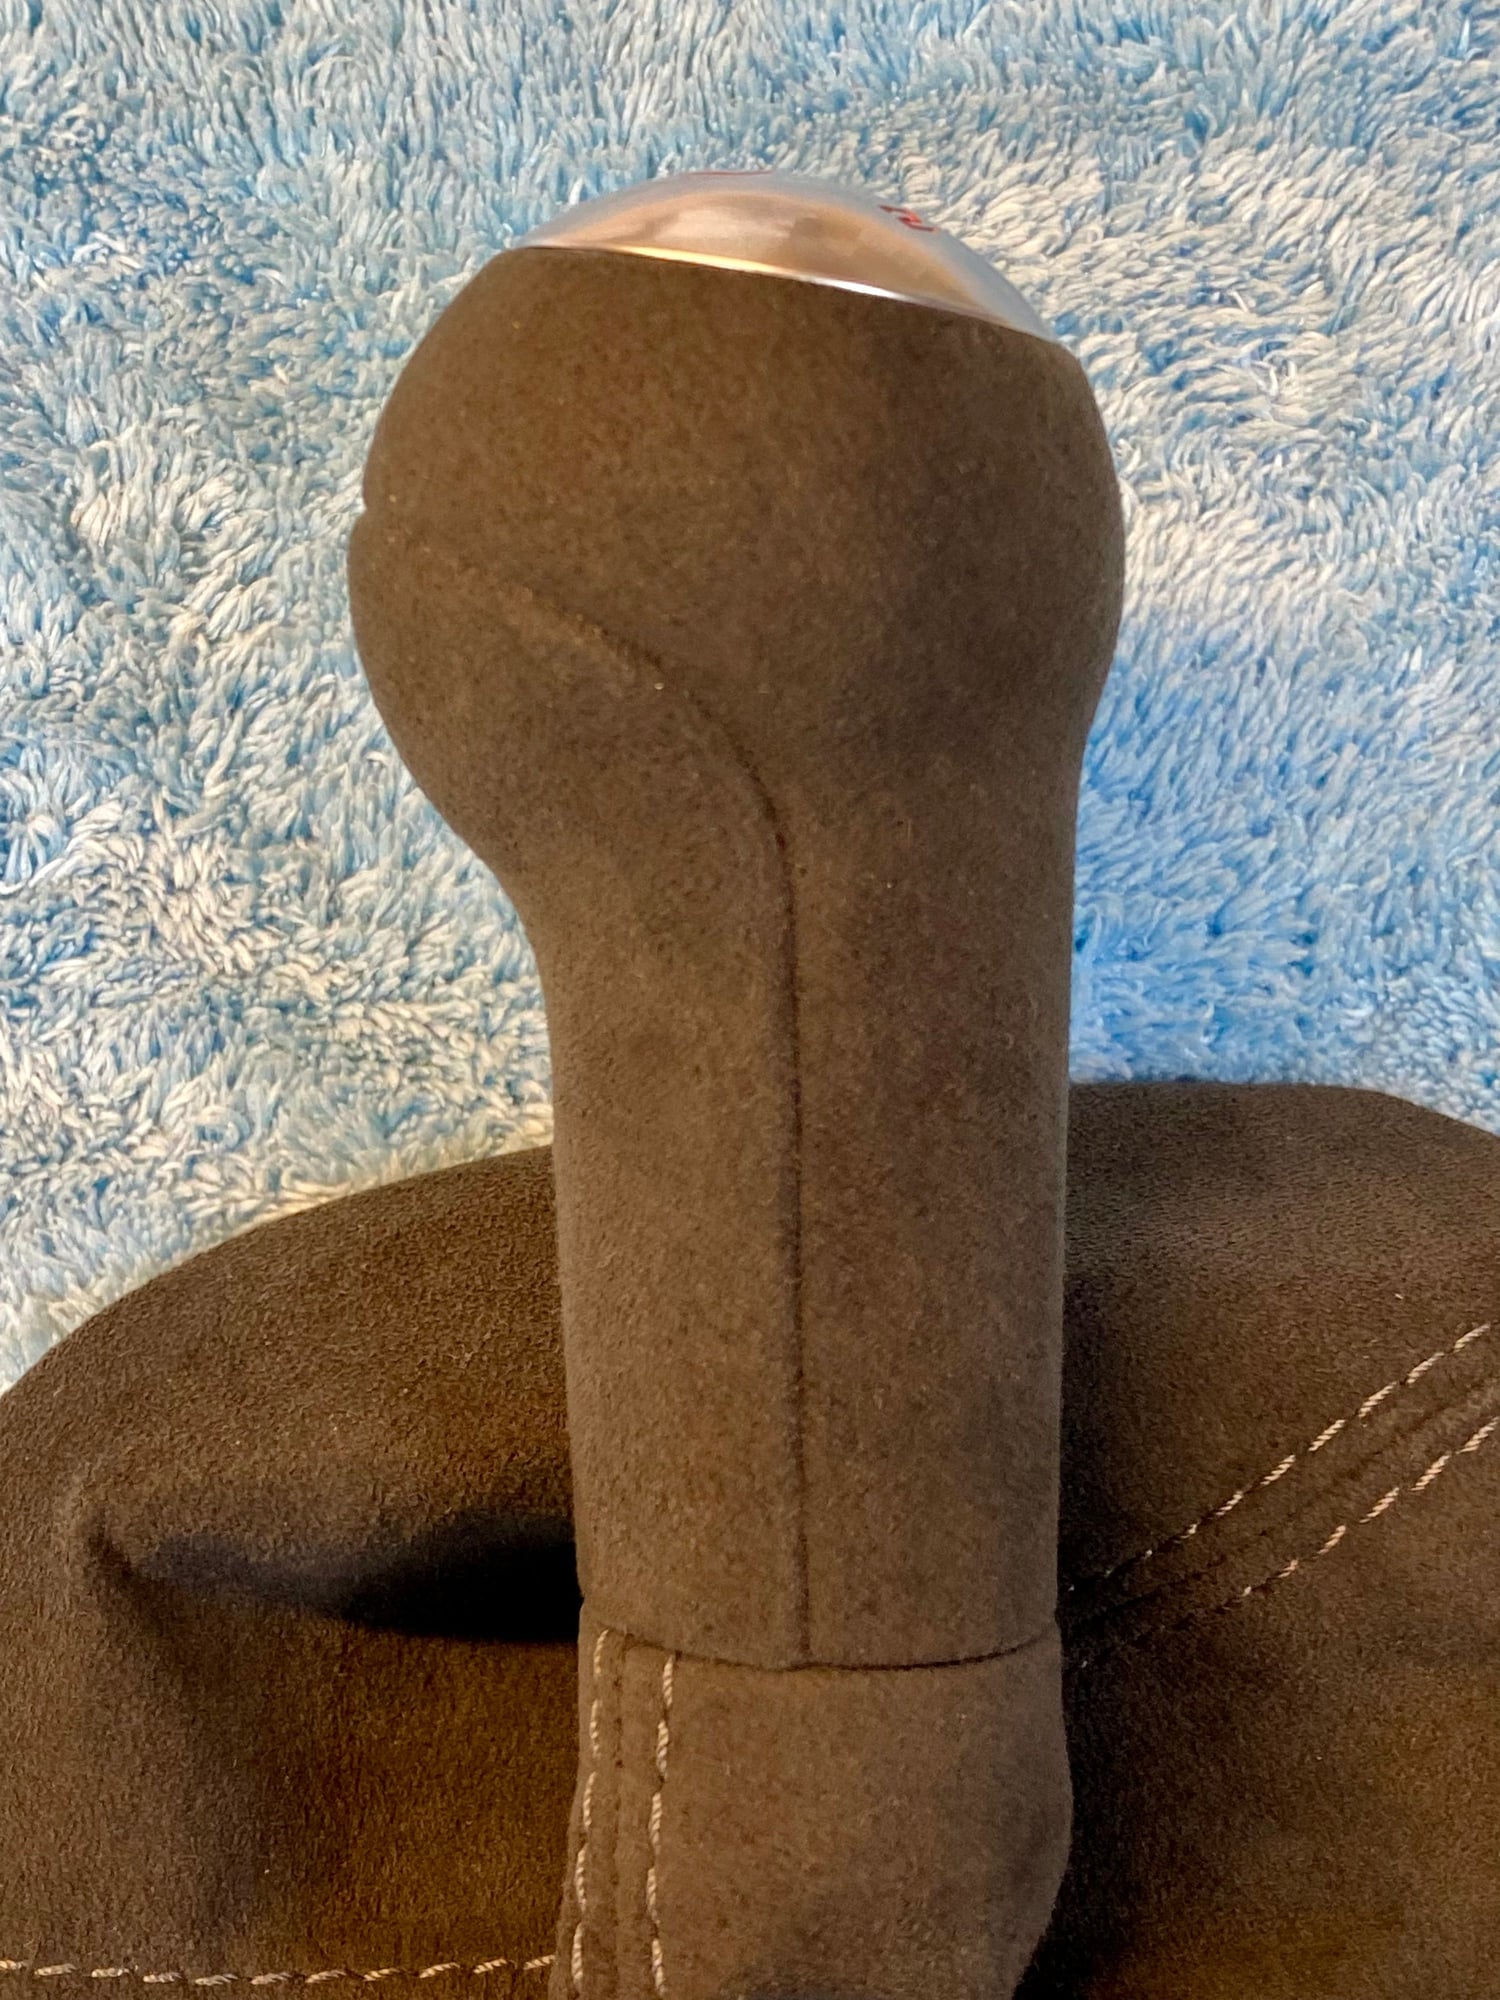 Interior/Upholstery - Rare 997 GT3 Alcantara Gearshift Knob and Boot. Excellent. - Used - 2016 to 0 Porsche 718 Spyder - Shreveport, LA 71106, United States